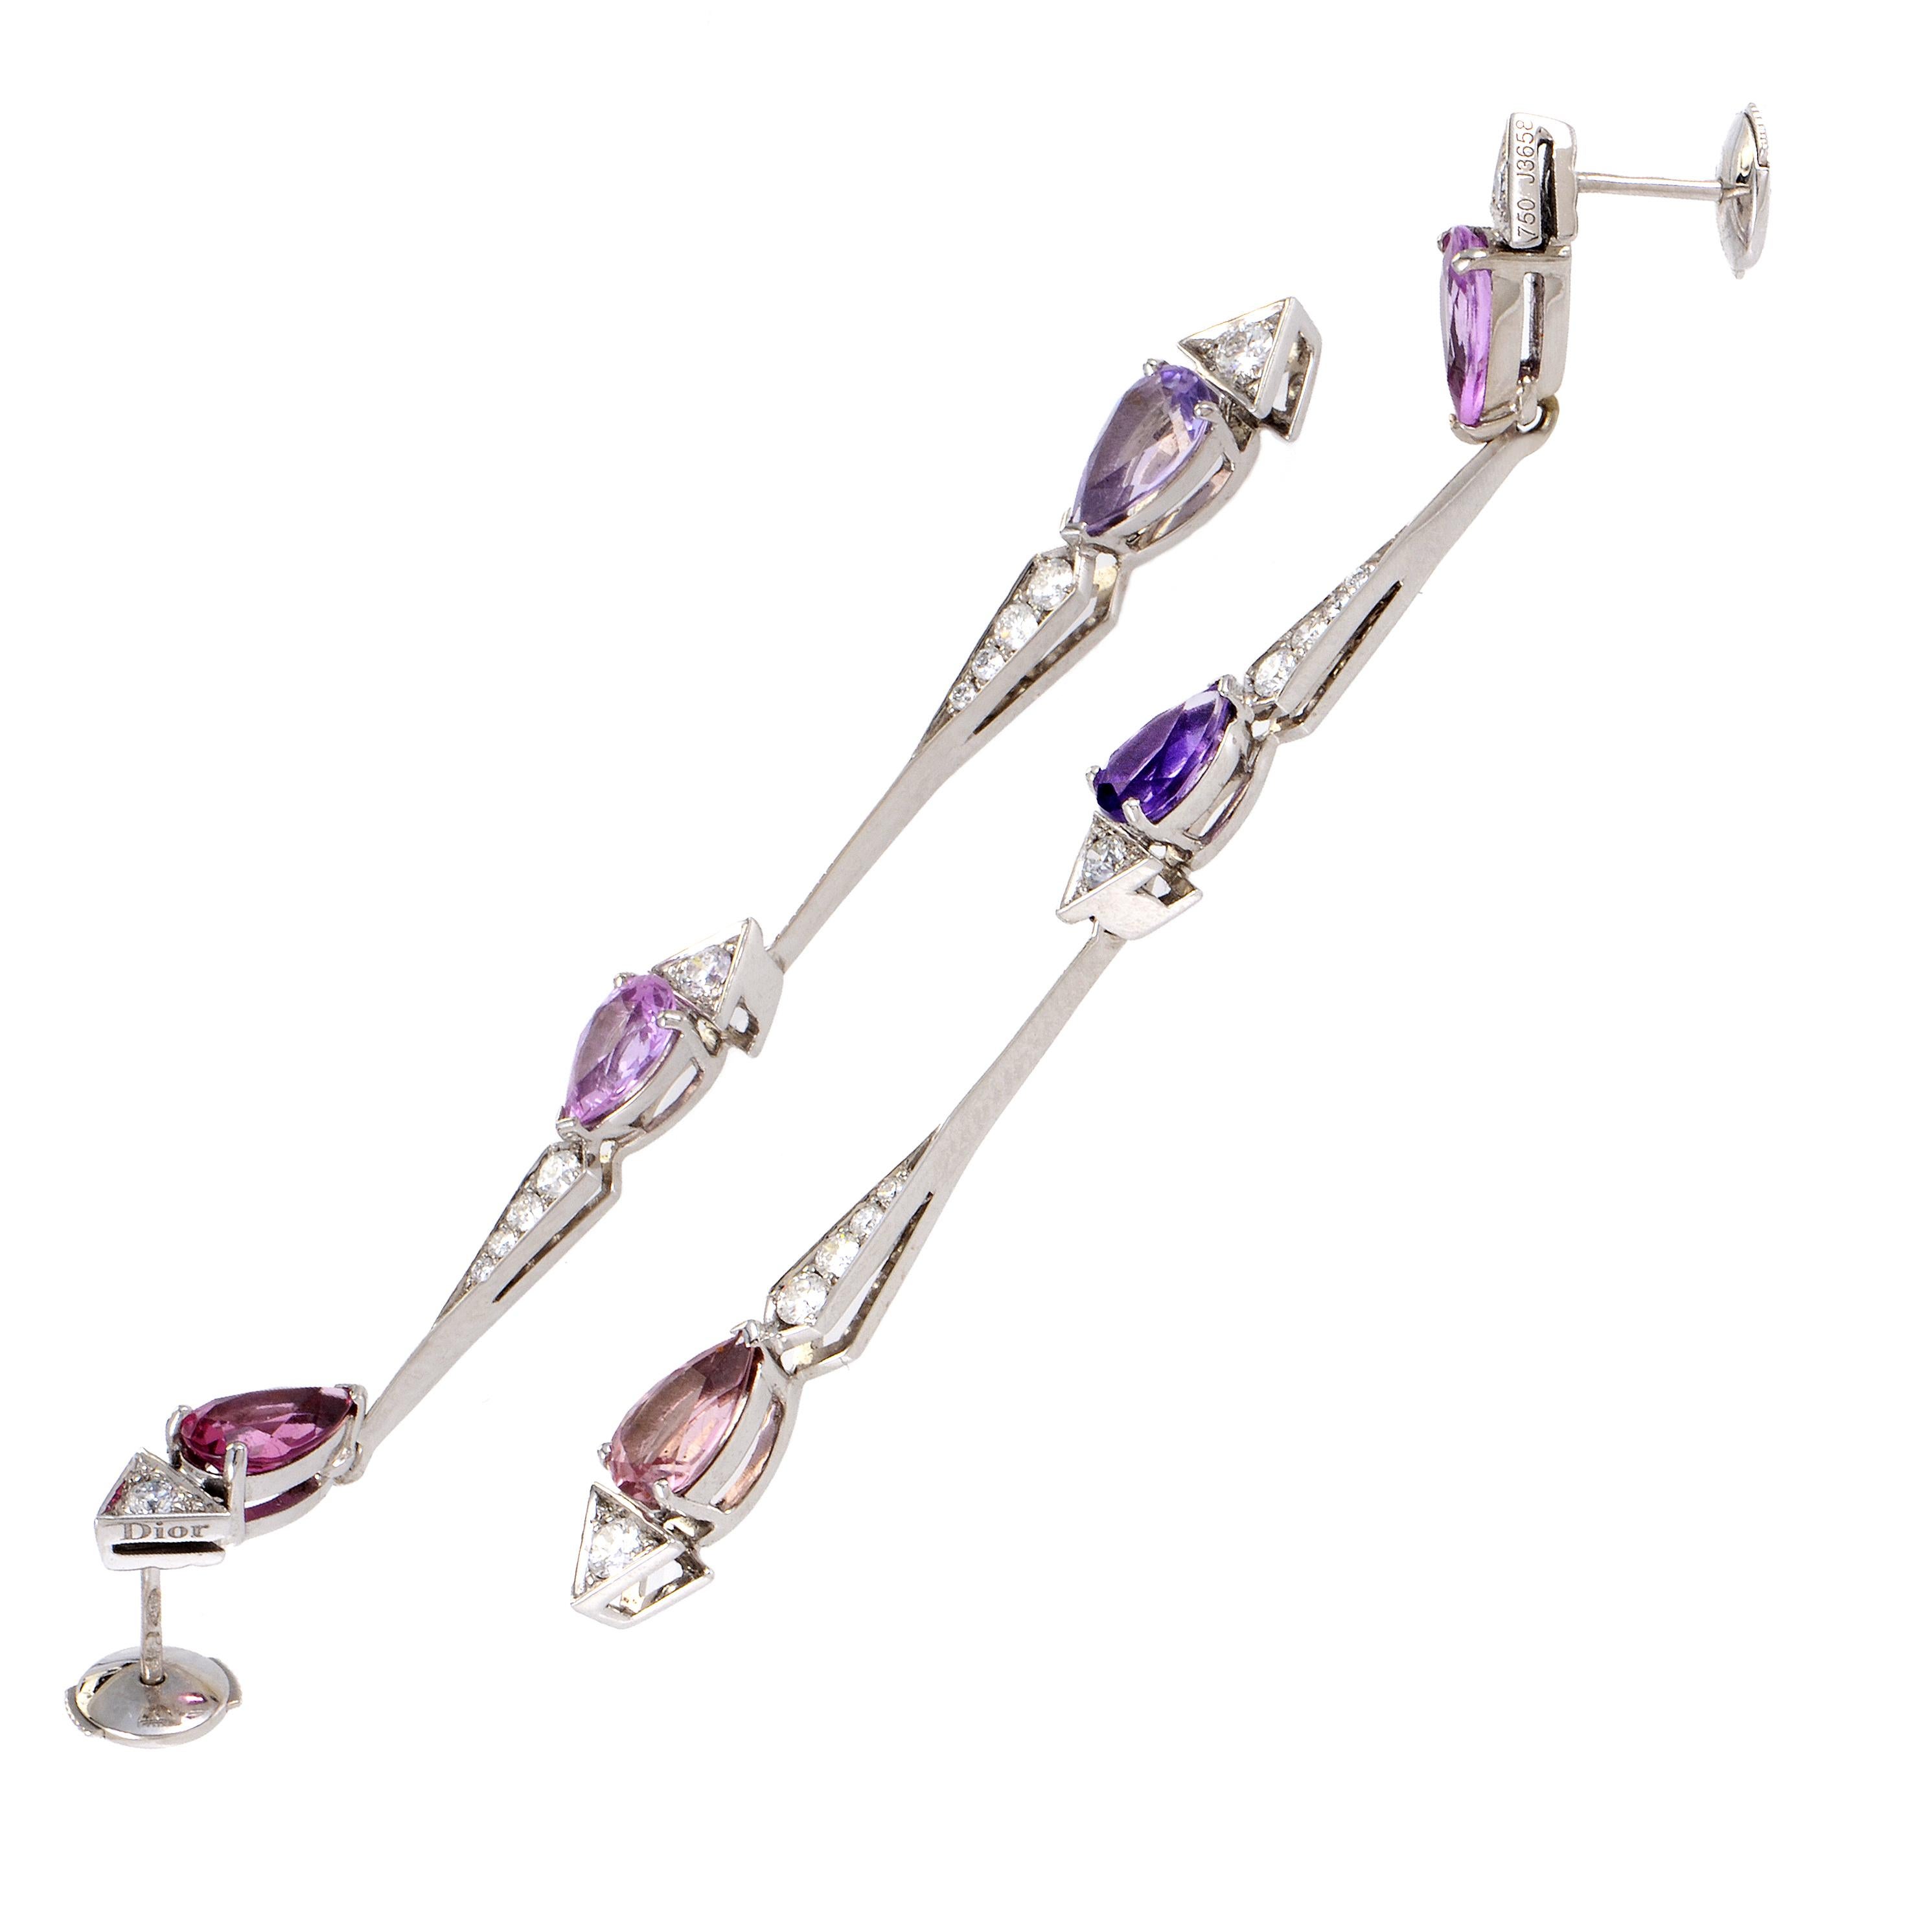 The exquisite shapes and precious colors of enchanting gems produce a spellbinding allure in these gorgeous 18K white gold earrings from Dior which boast neat tourmalines totaling 1.45 carats, adorable pink sapphires amounting to 1.37 carats and